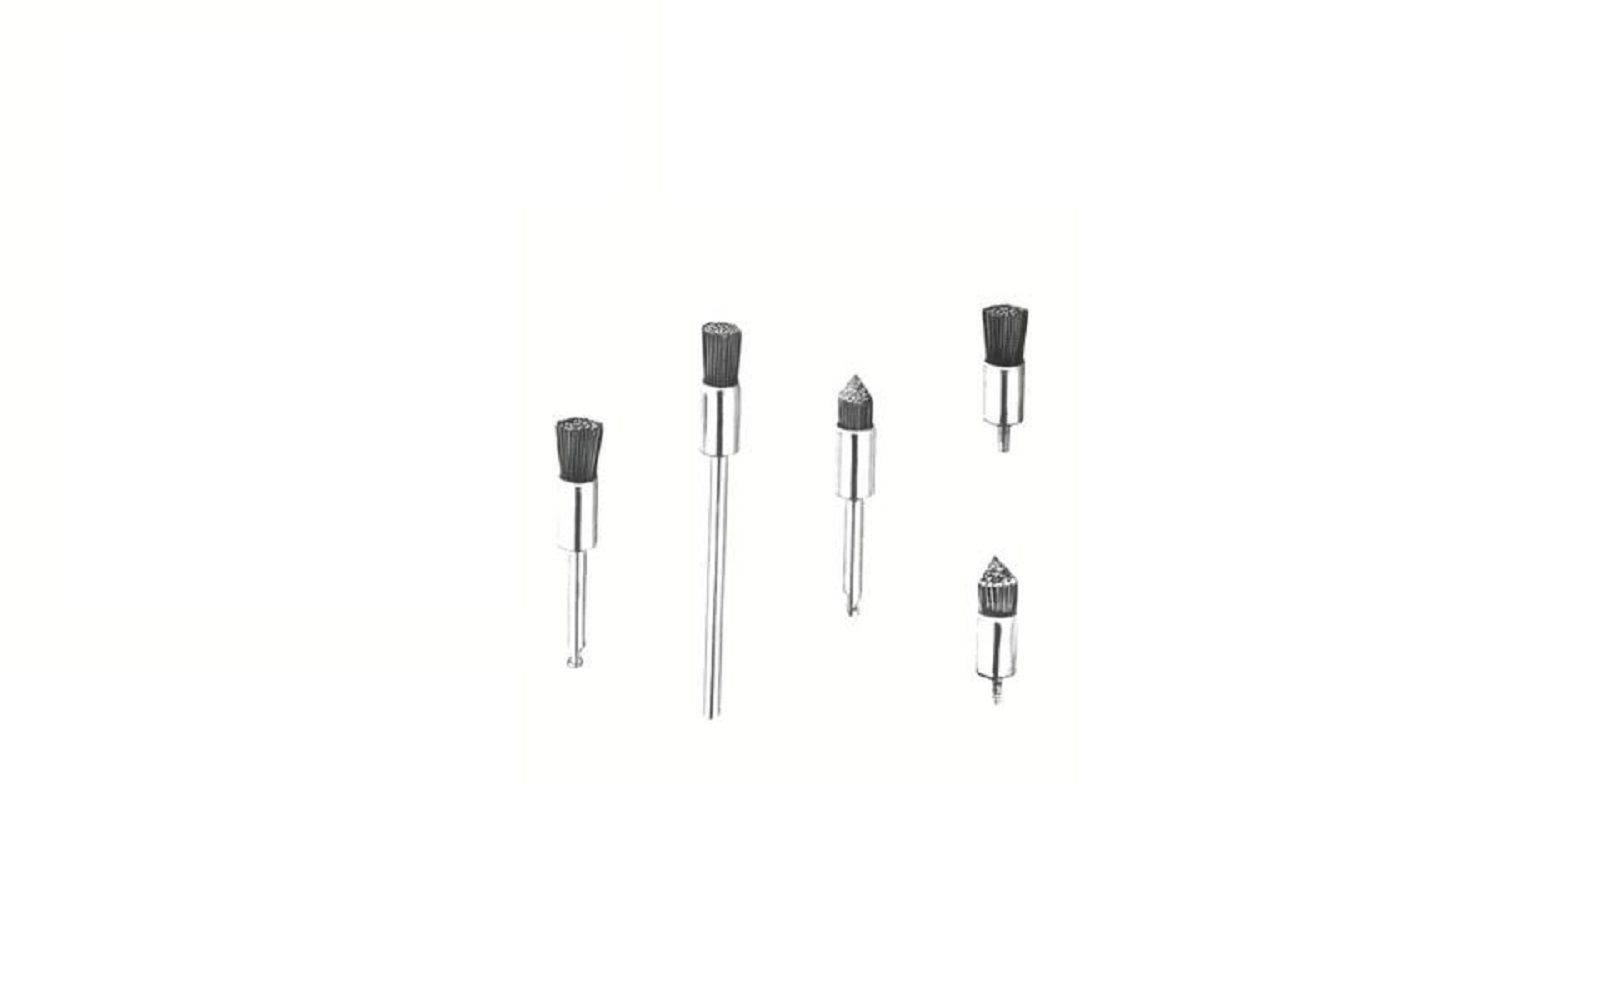 Crescent® prophy brushes, latch type - crescent/rinn dental manufacturing